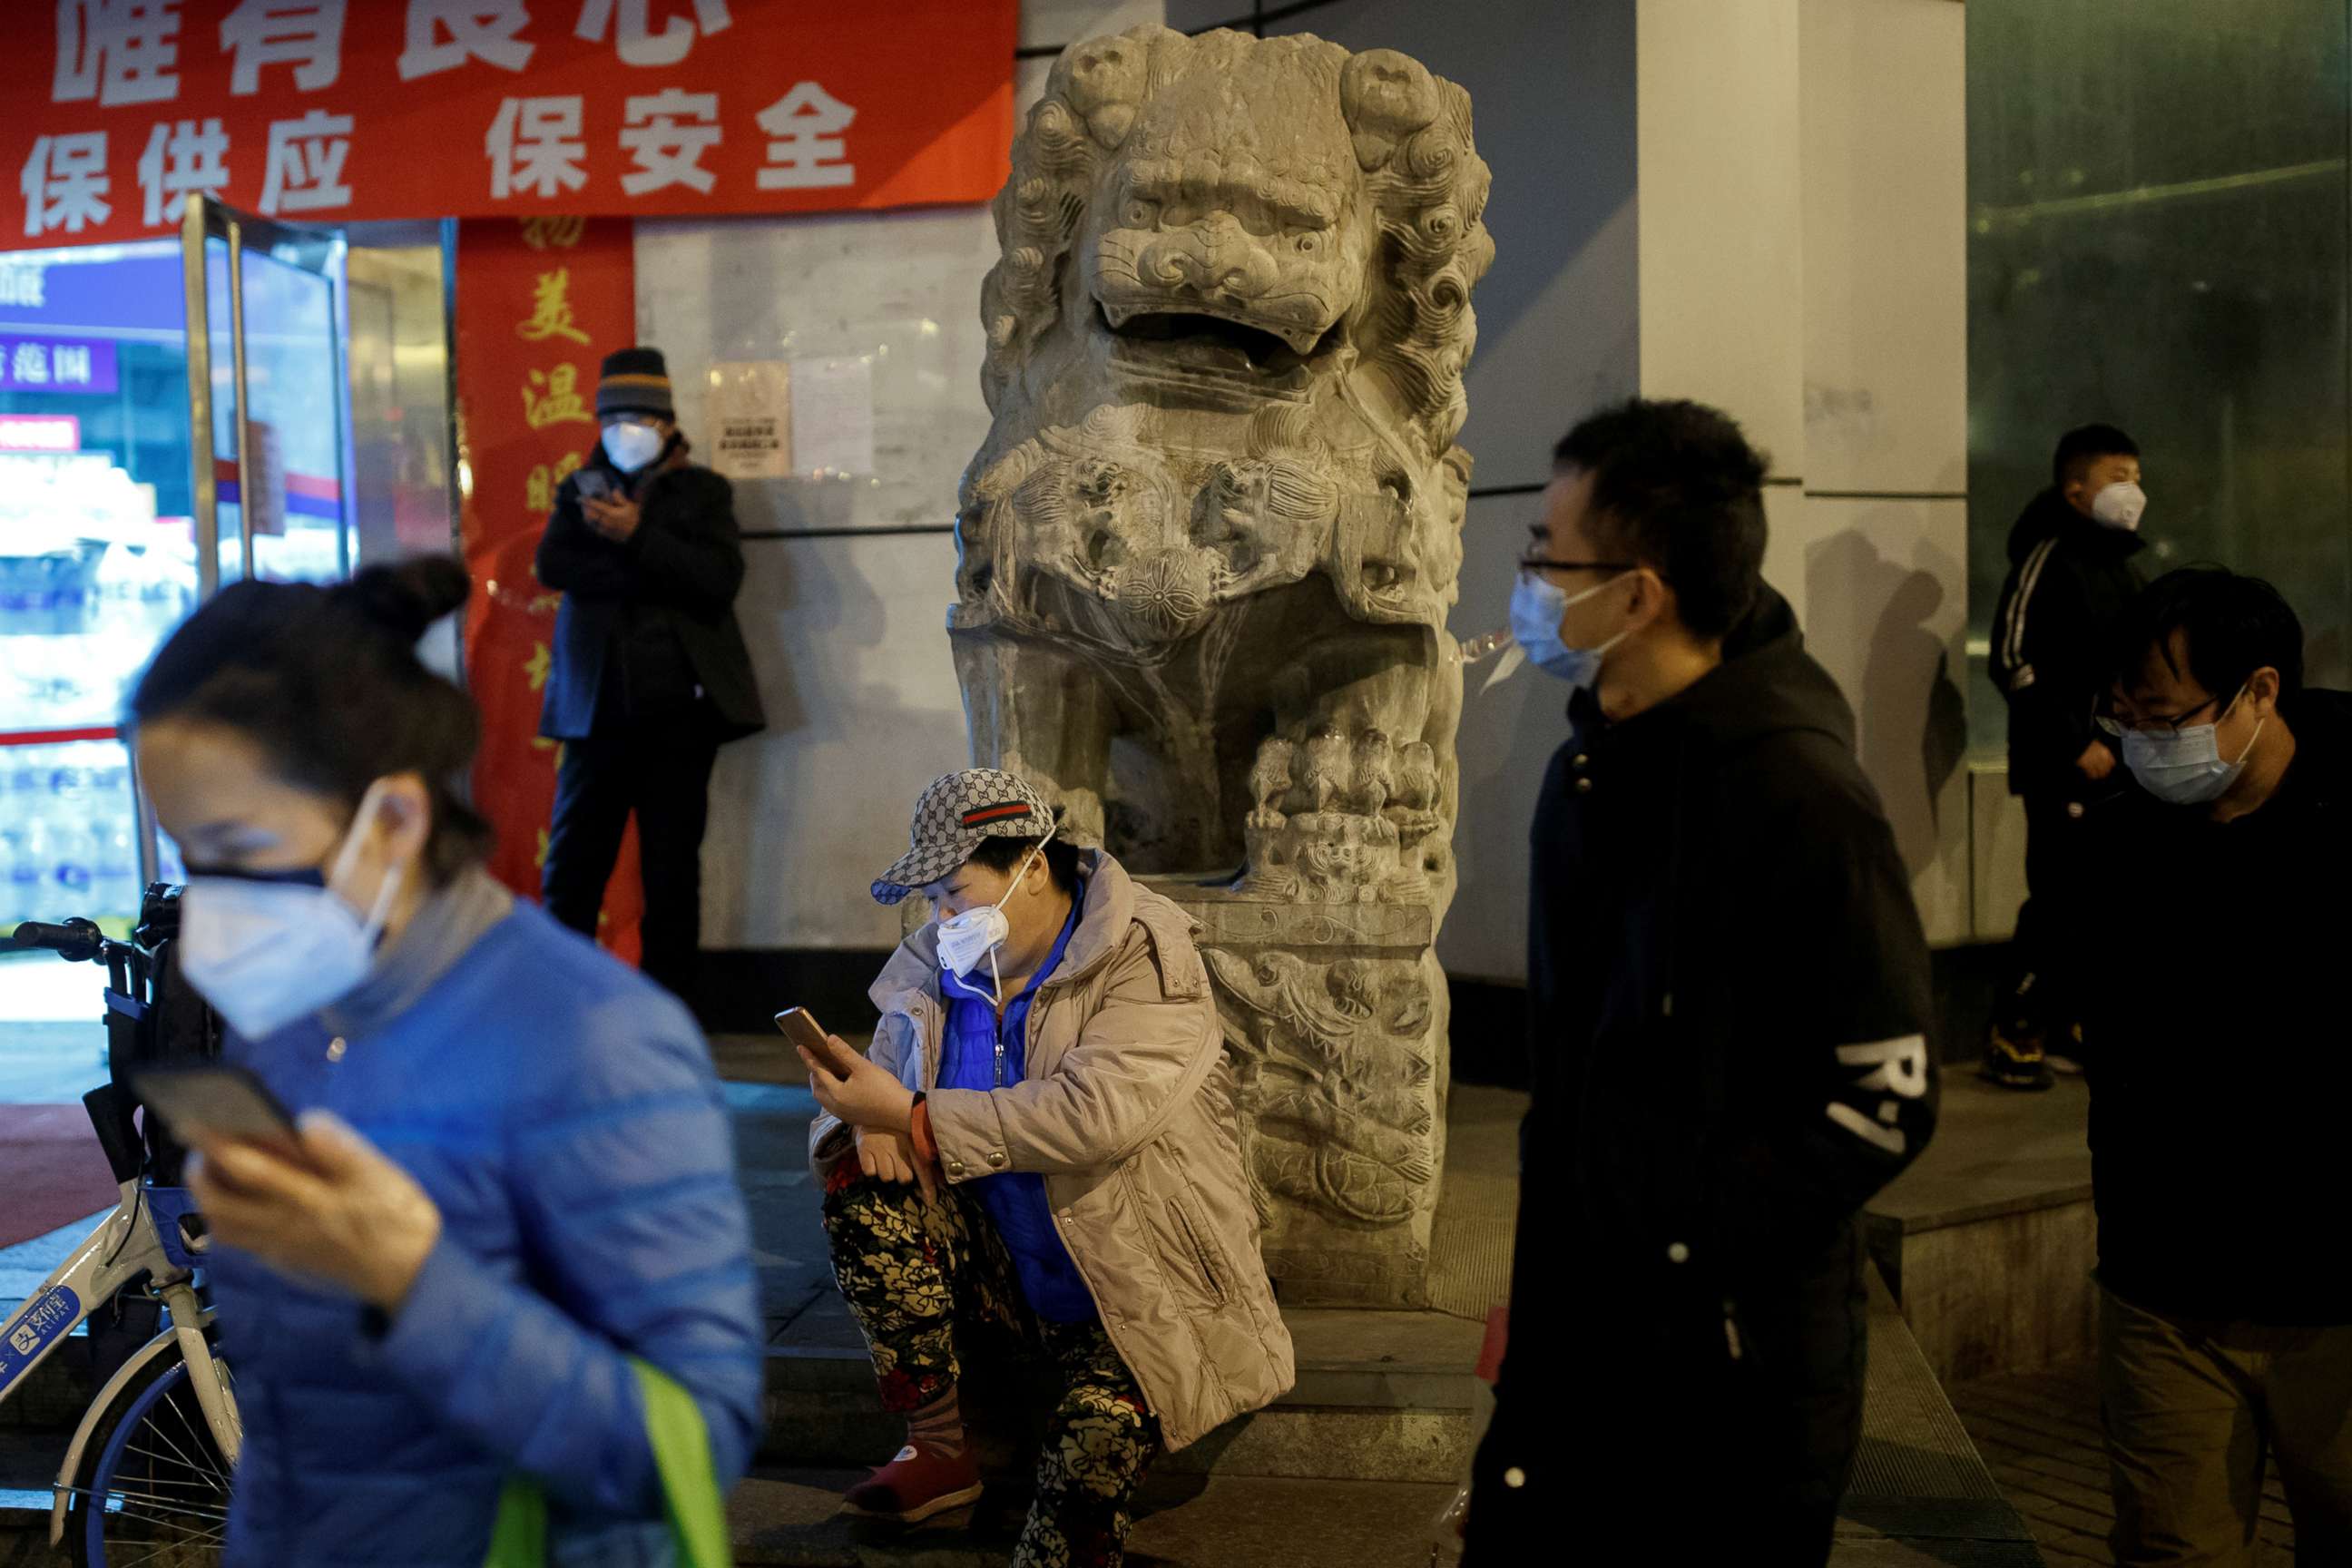 PHOTO:People wear face masks in a street in Beijing as the country is hit by an outbreak of the novel coronavirus, China, Feb. 26, 2020.